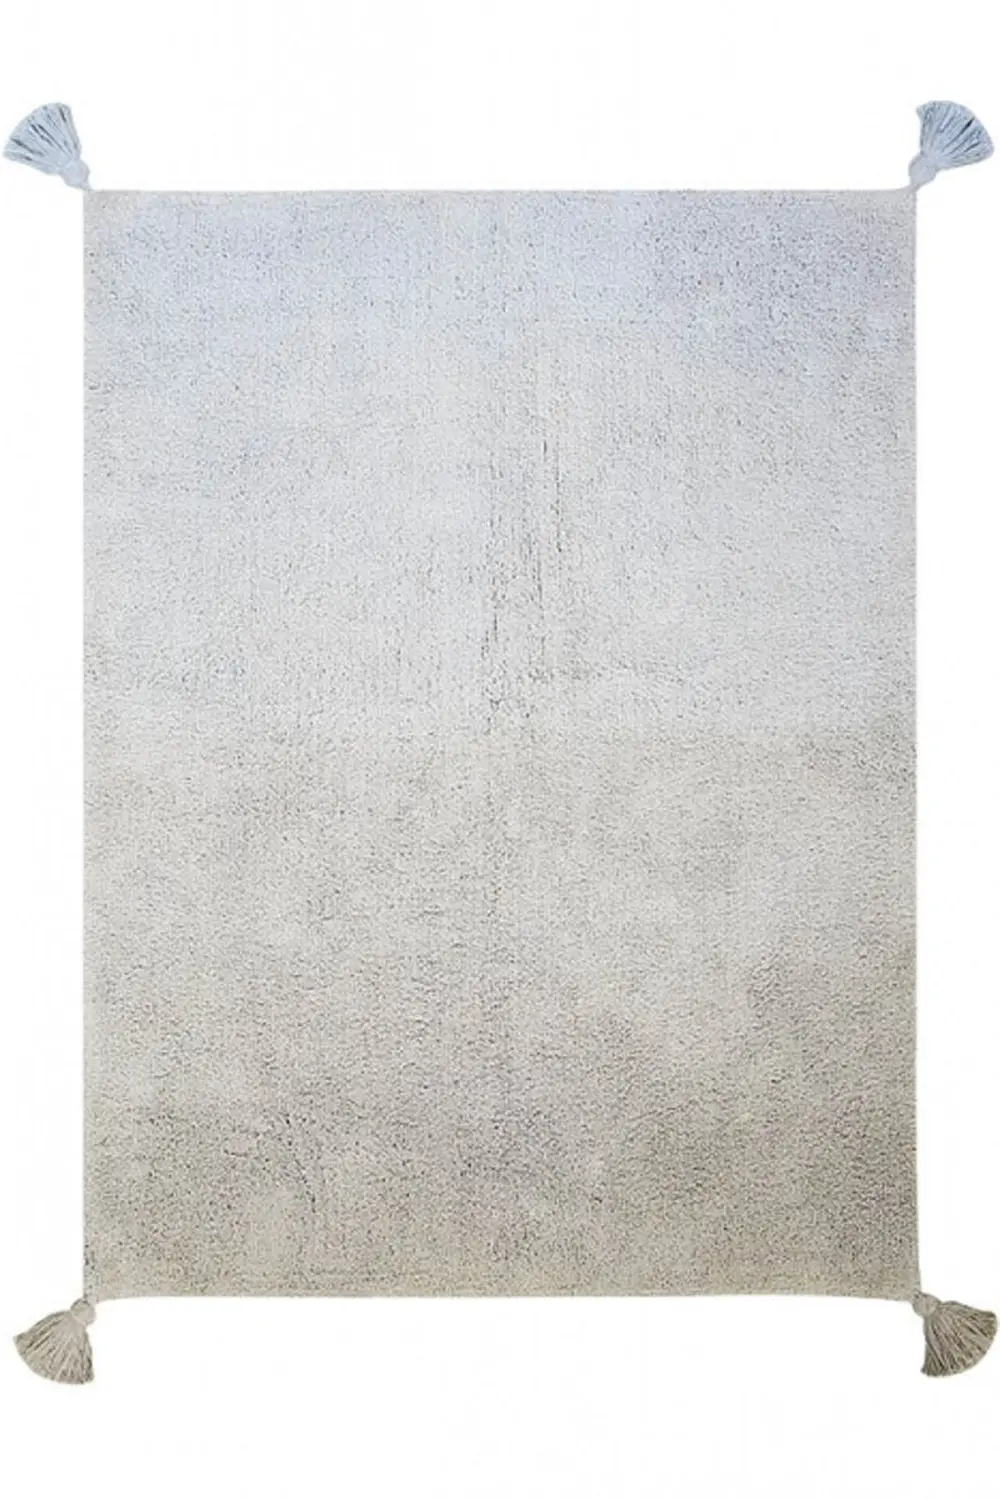 C-DE-BL 4 x 5 Small Ombre Gray and Baby Blue Washable Rug-1